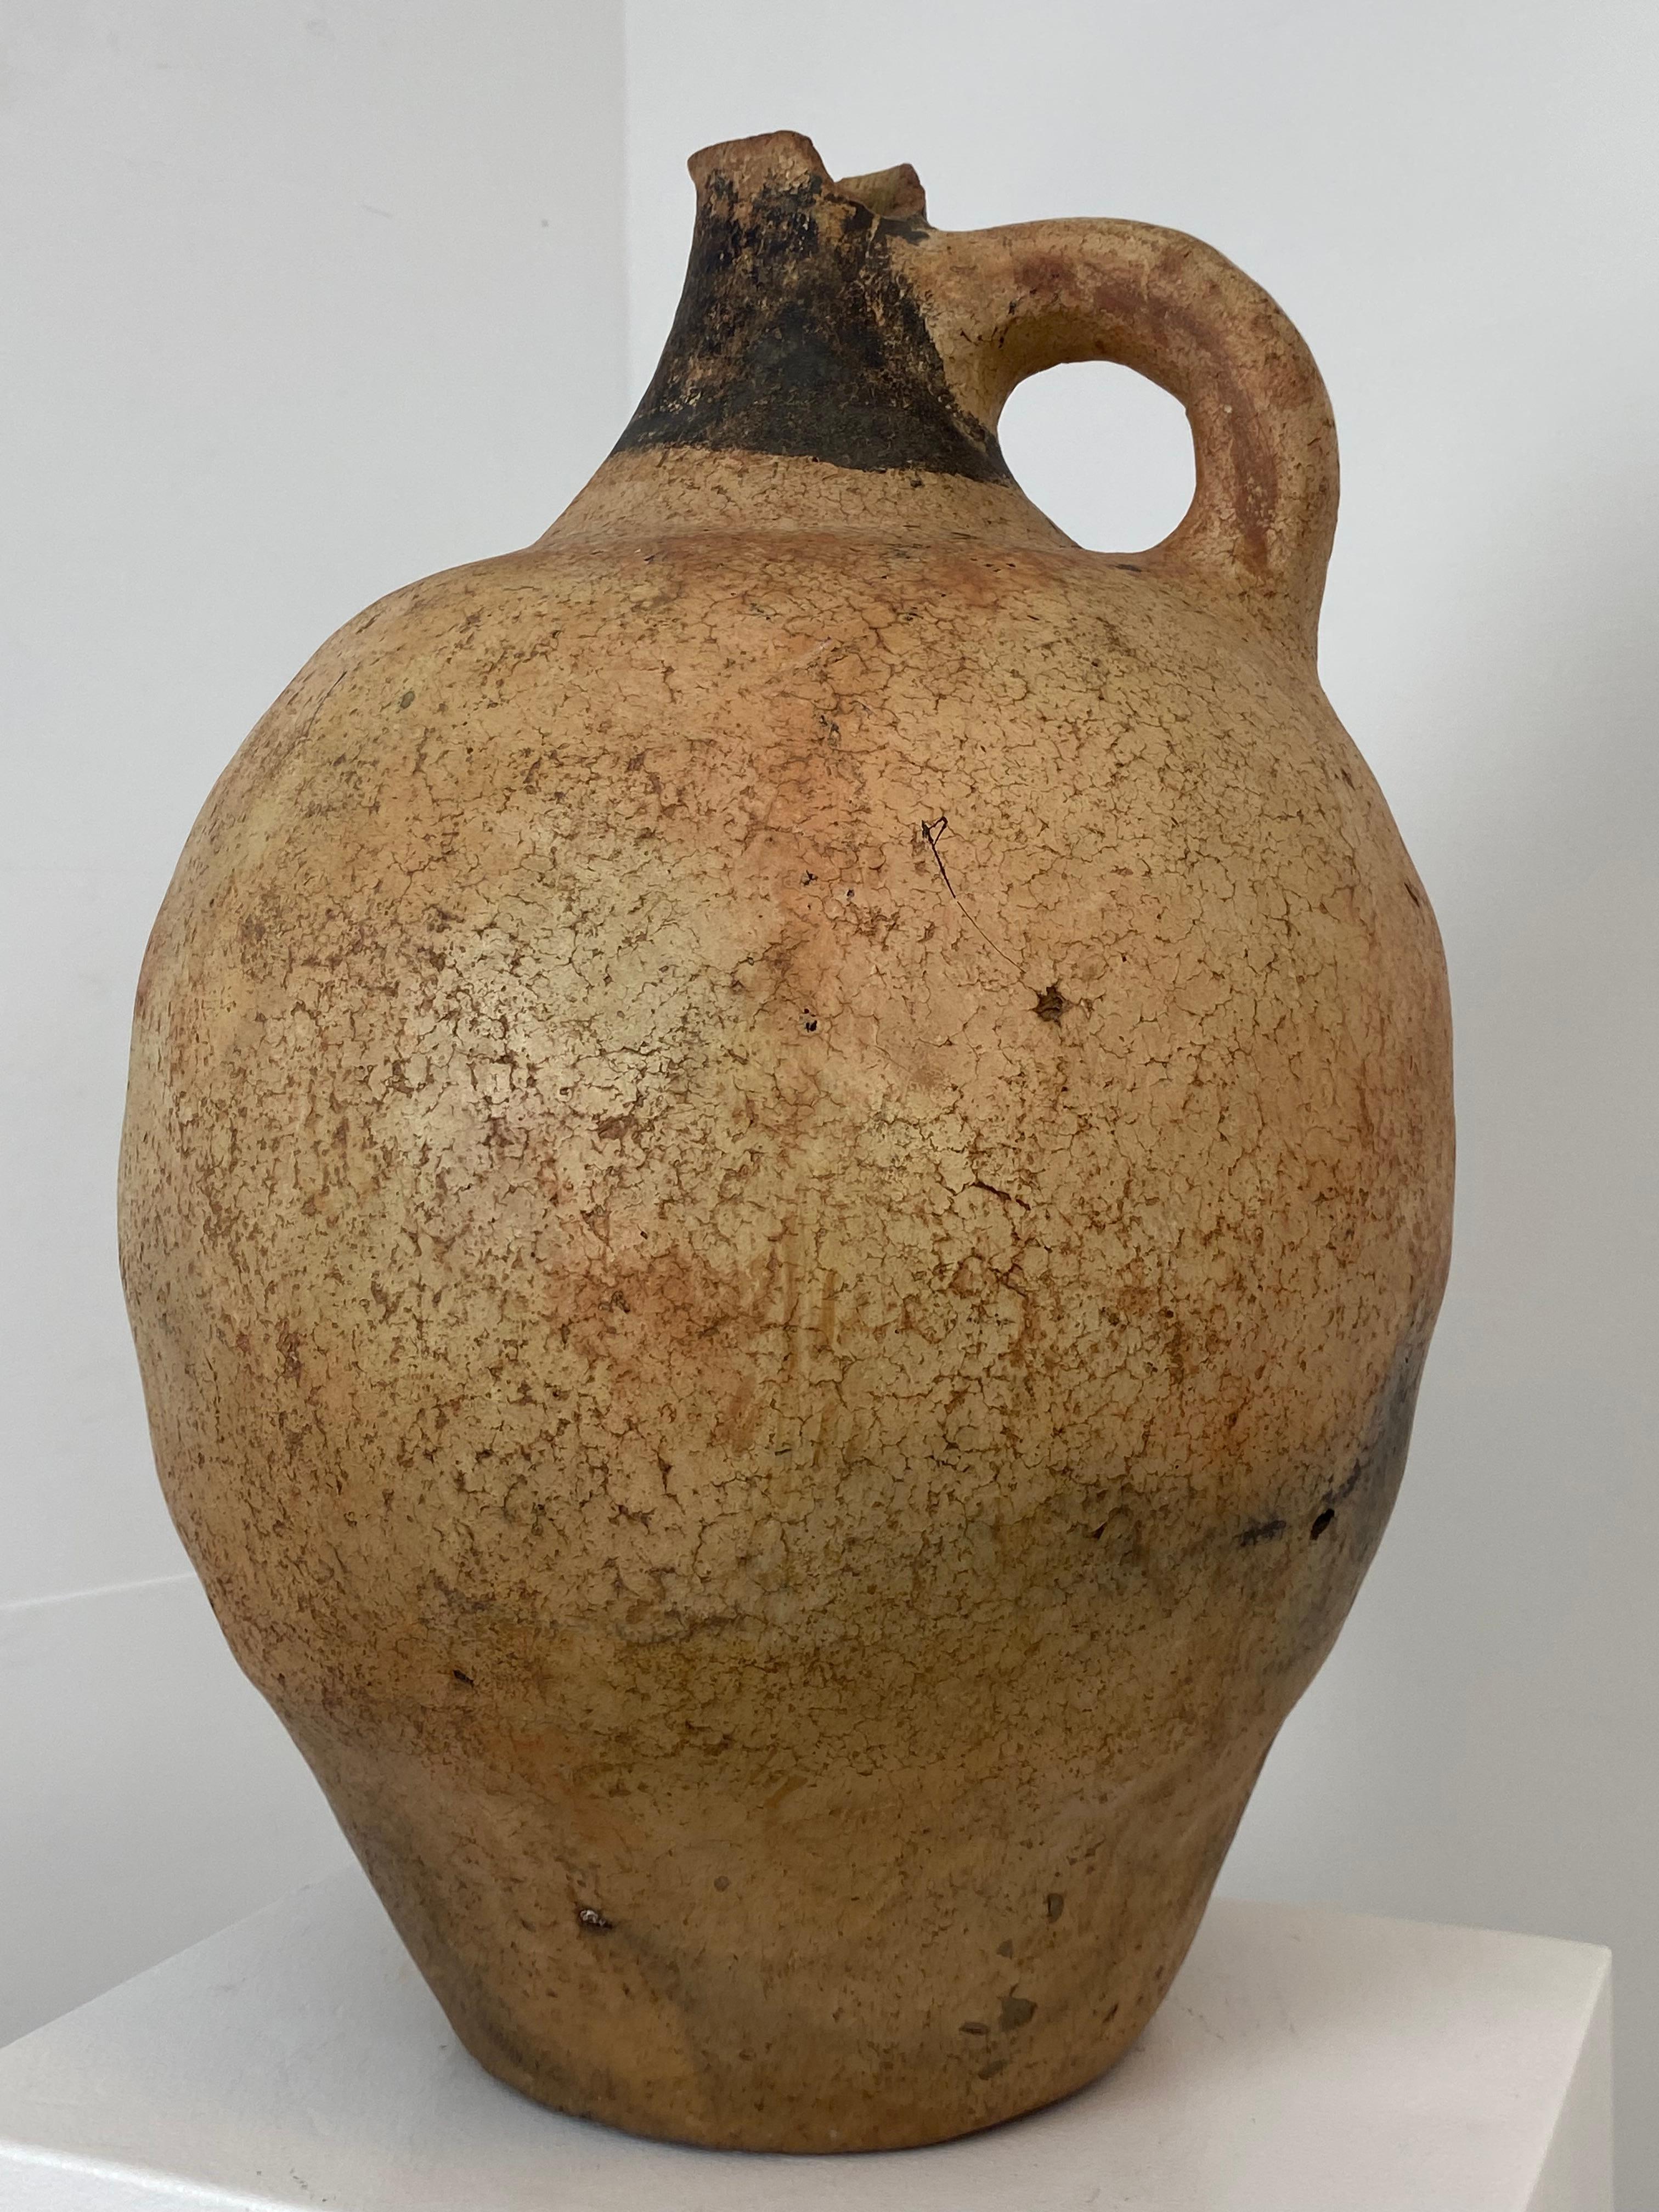 Antique Berber Terracotta jar from Southern Morocco from around 1920,
the jar has one handle and has a beautiful Patina and Shine and a Black colored top decoration,
great Brown-Beige Color, very decorative object